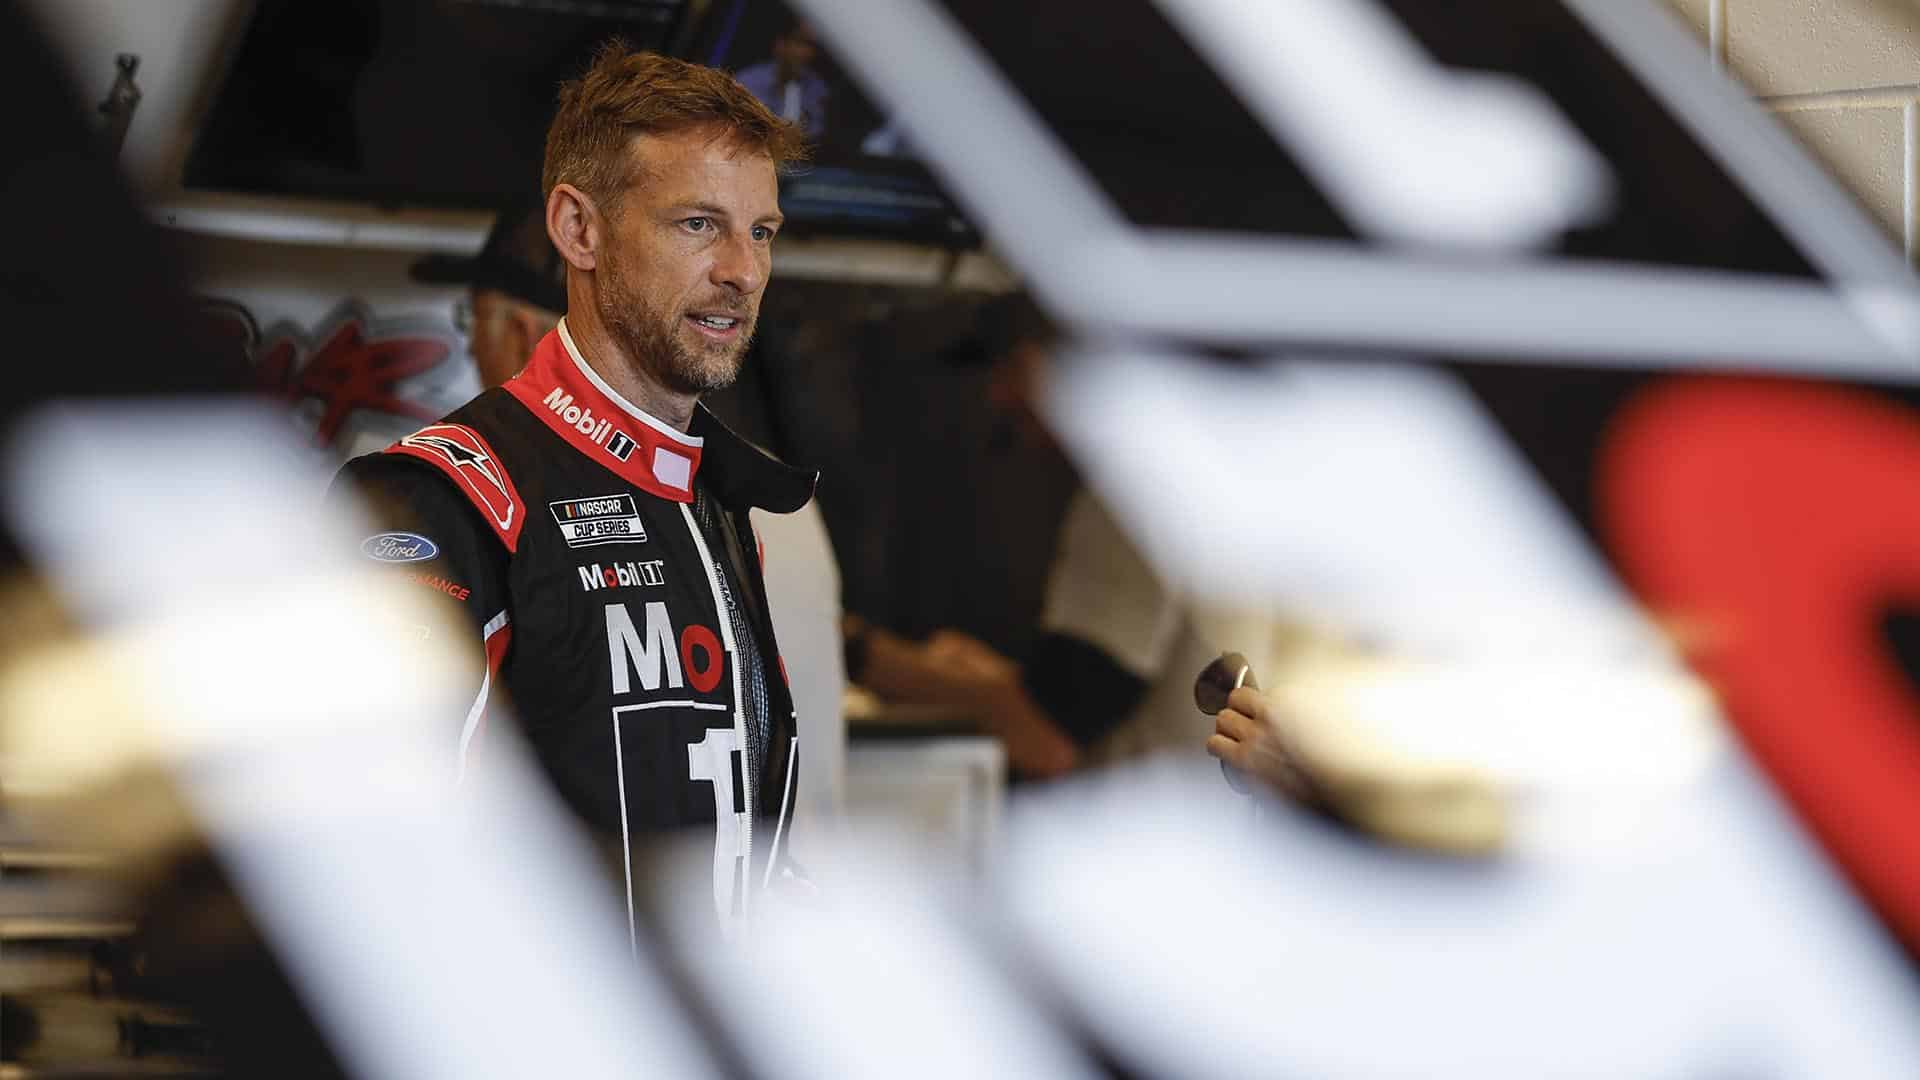 Jenson Button understands that it will take time to learn and be competitive in the NASCAR Cup Series.